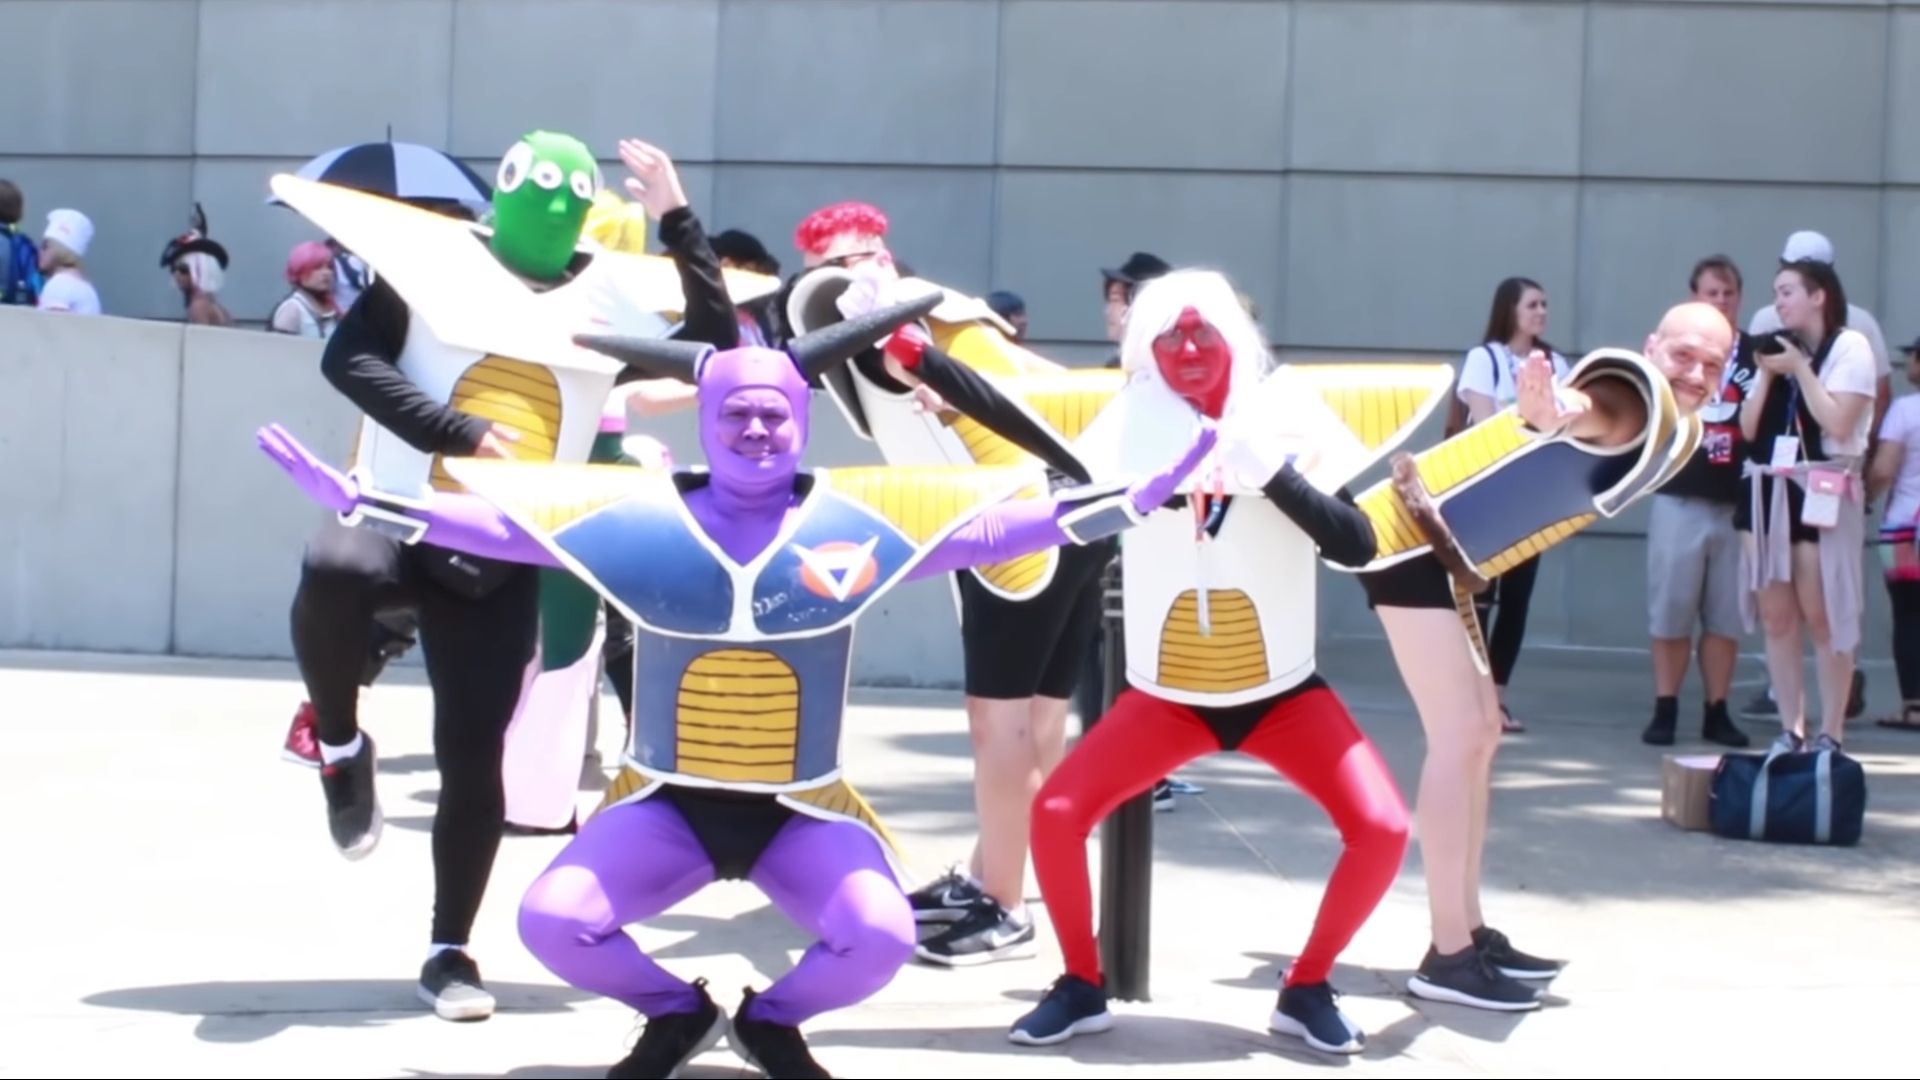 I present to you. THE GINYU FORCE